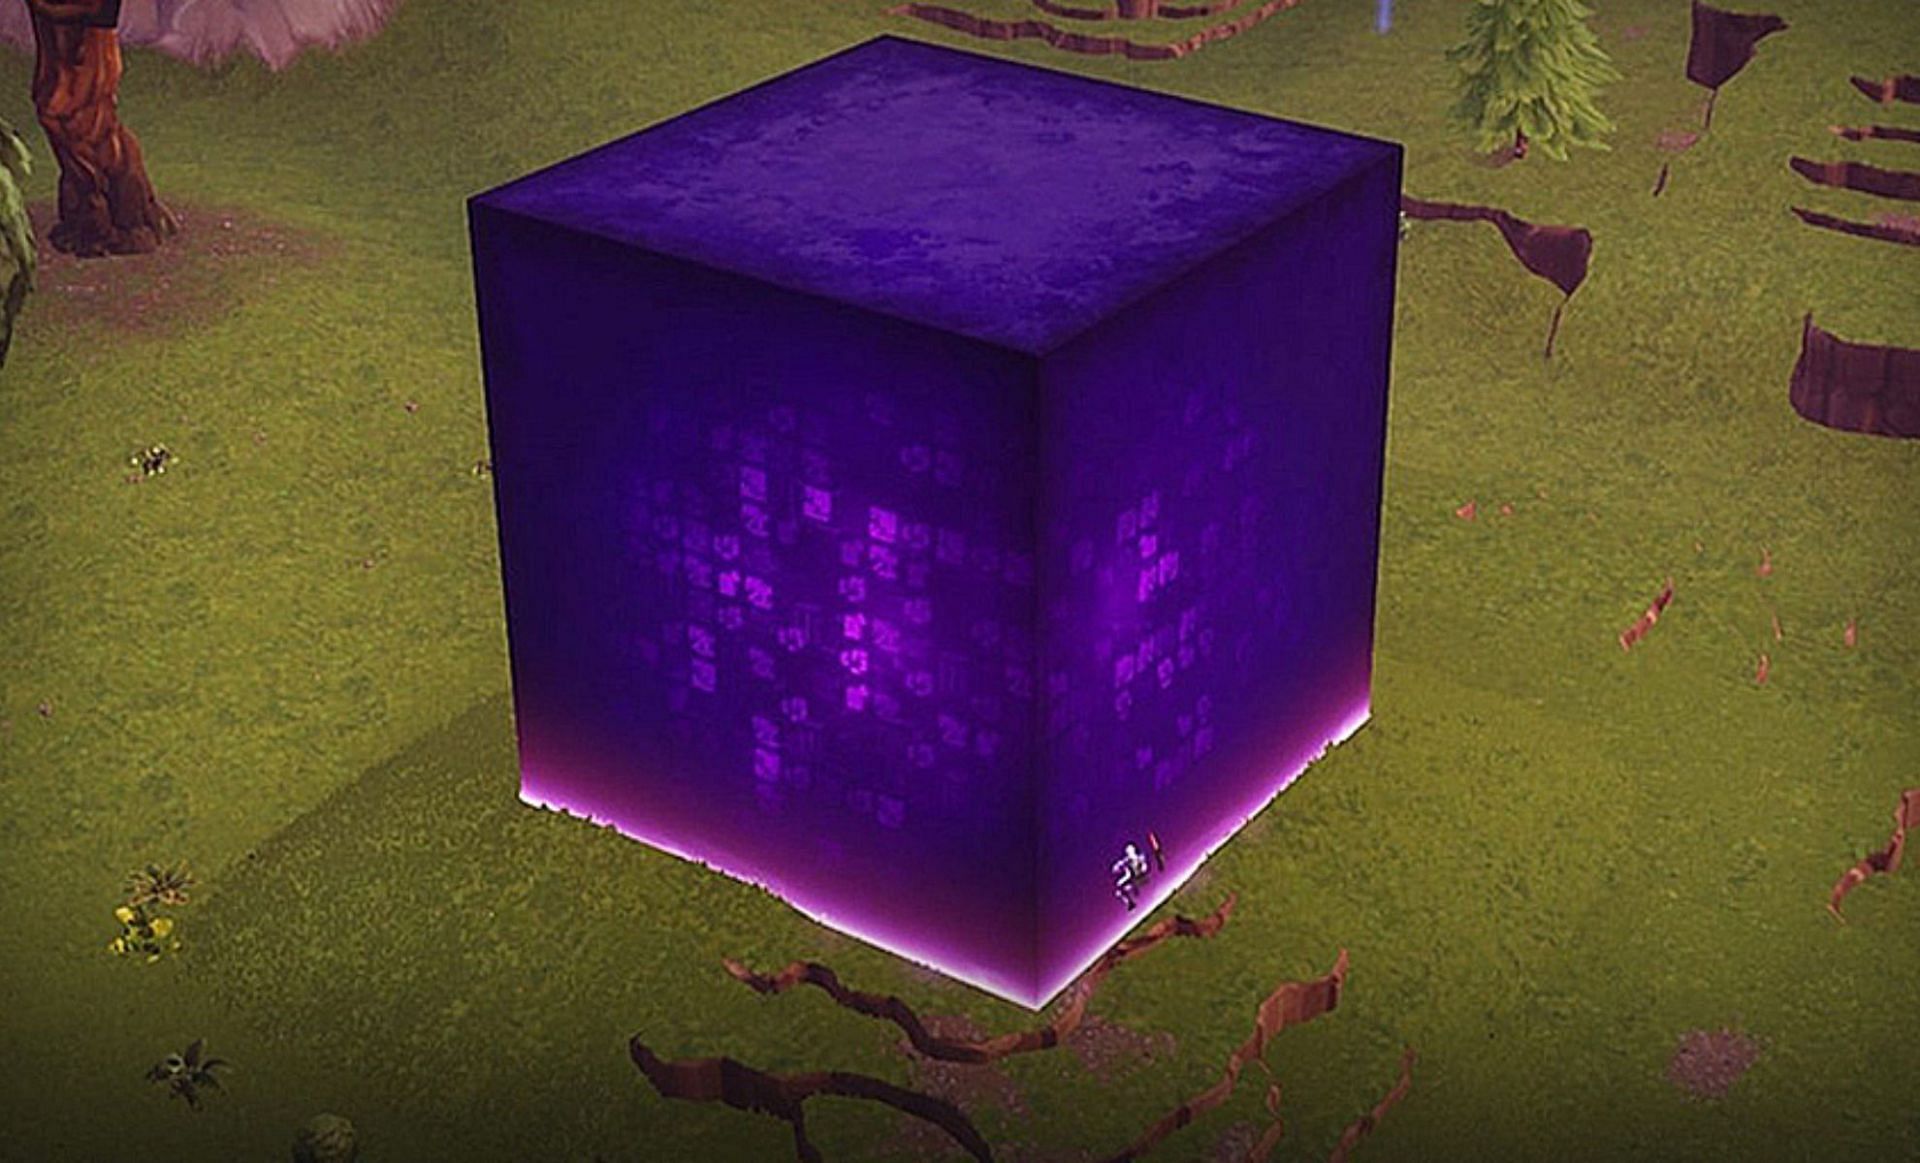 Is Kevin the Cube on the way back? Image via Epic Games)